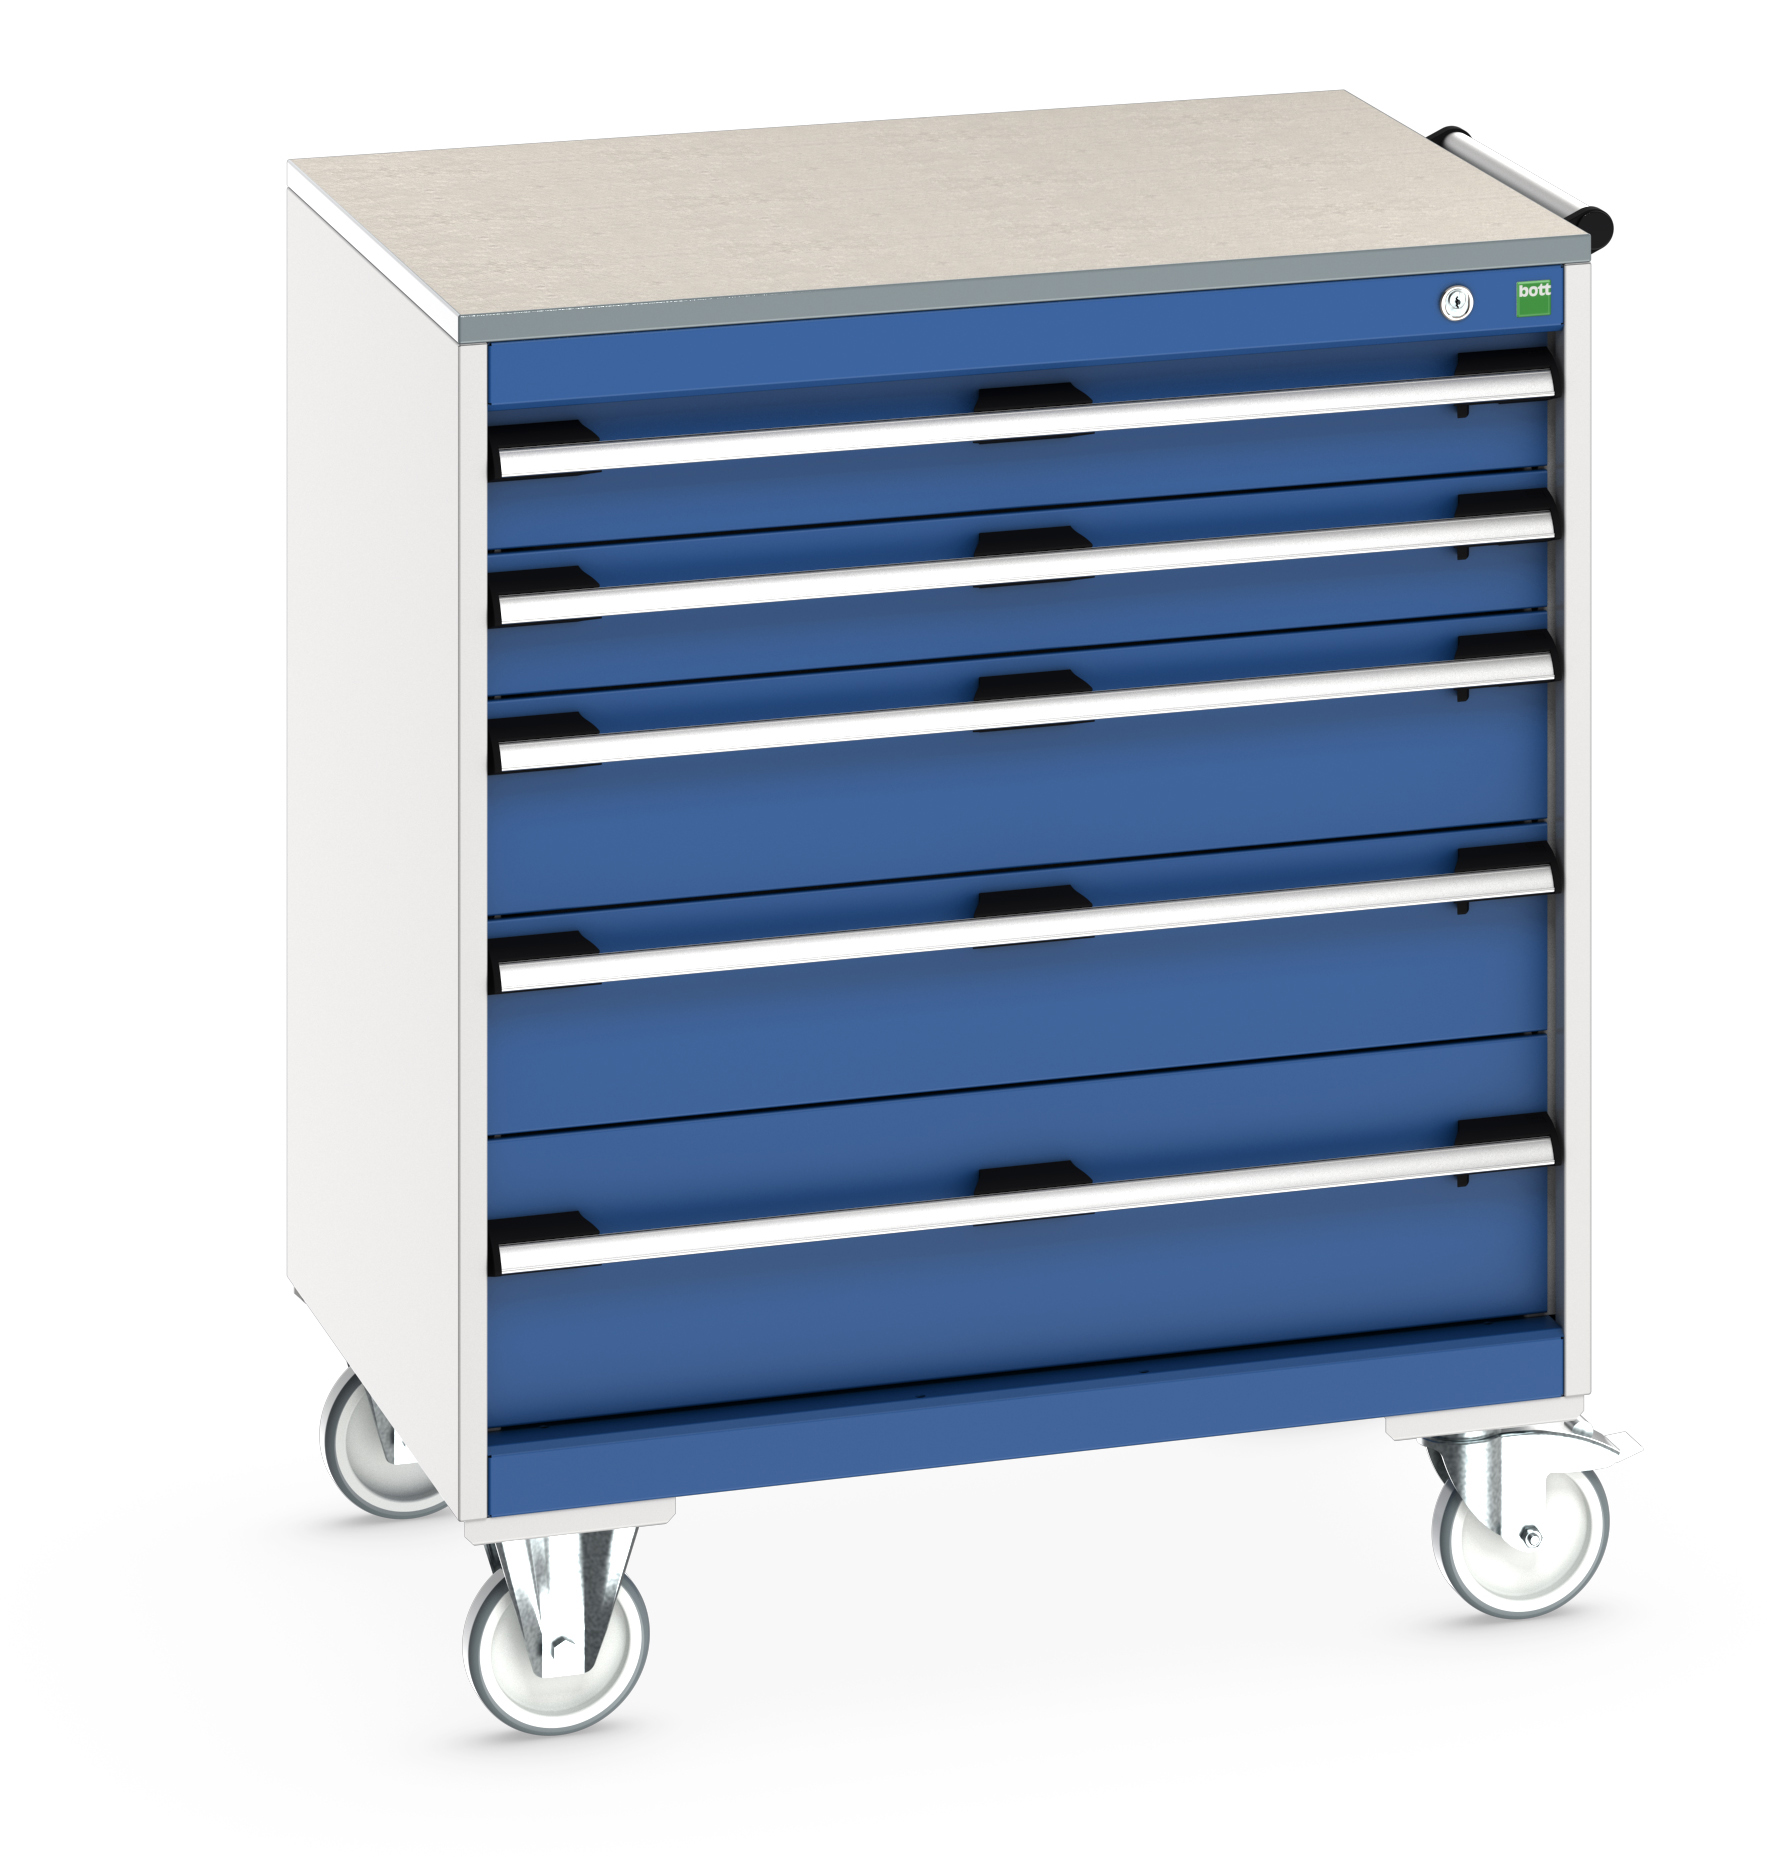 Bott Cubio Mobile Drawer Cabinet With 5 Drawers & Lino Worktop - 40402158.11V